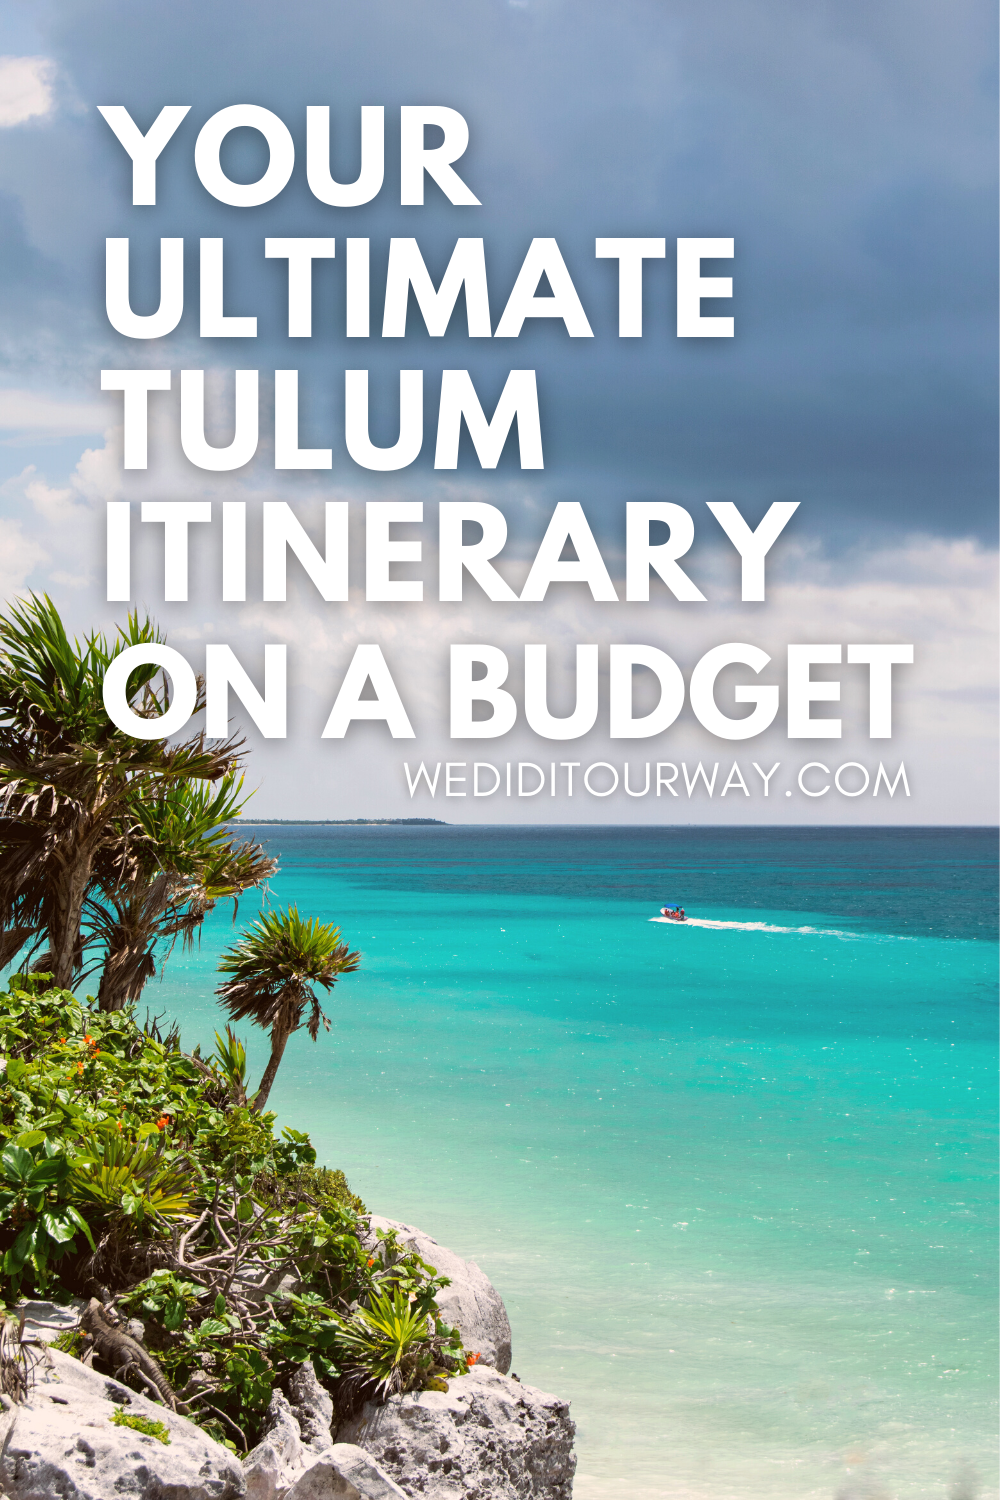 Your Tulum itinerary on a budget